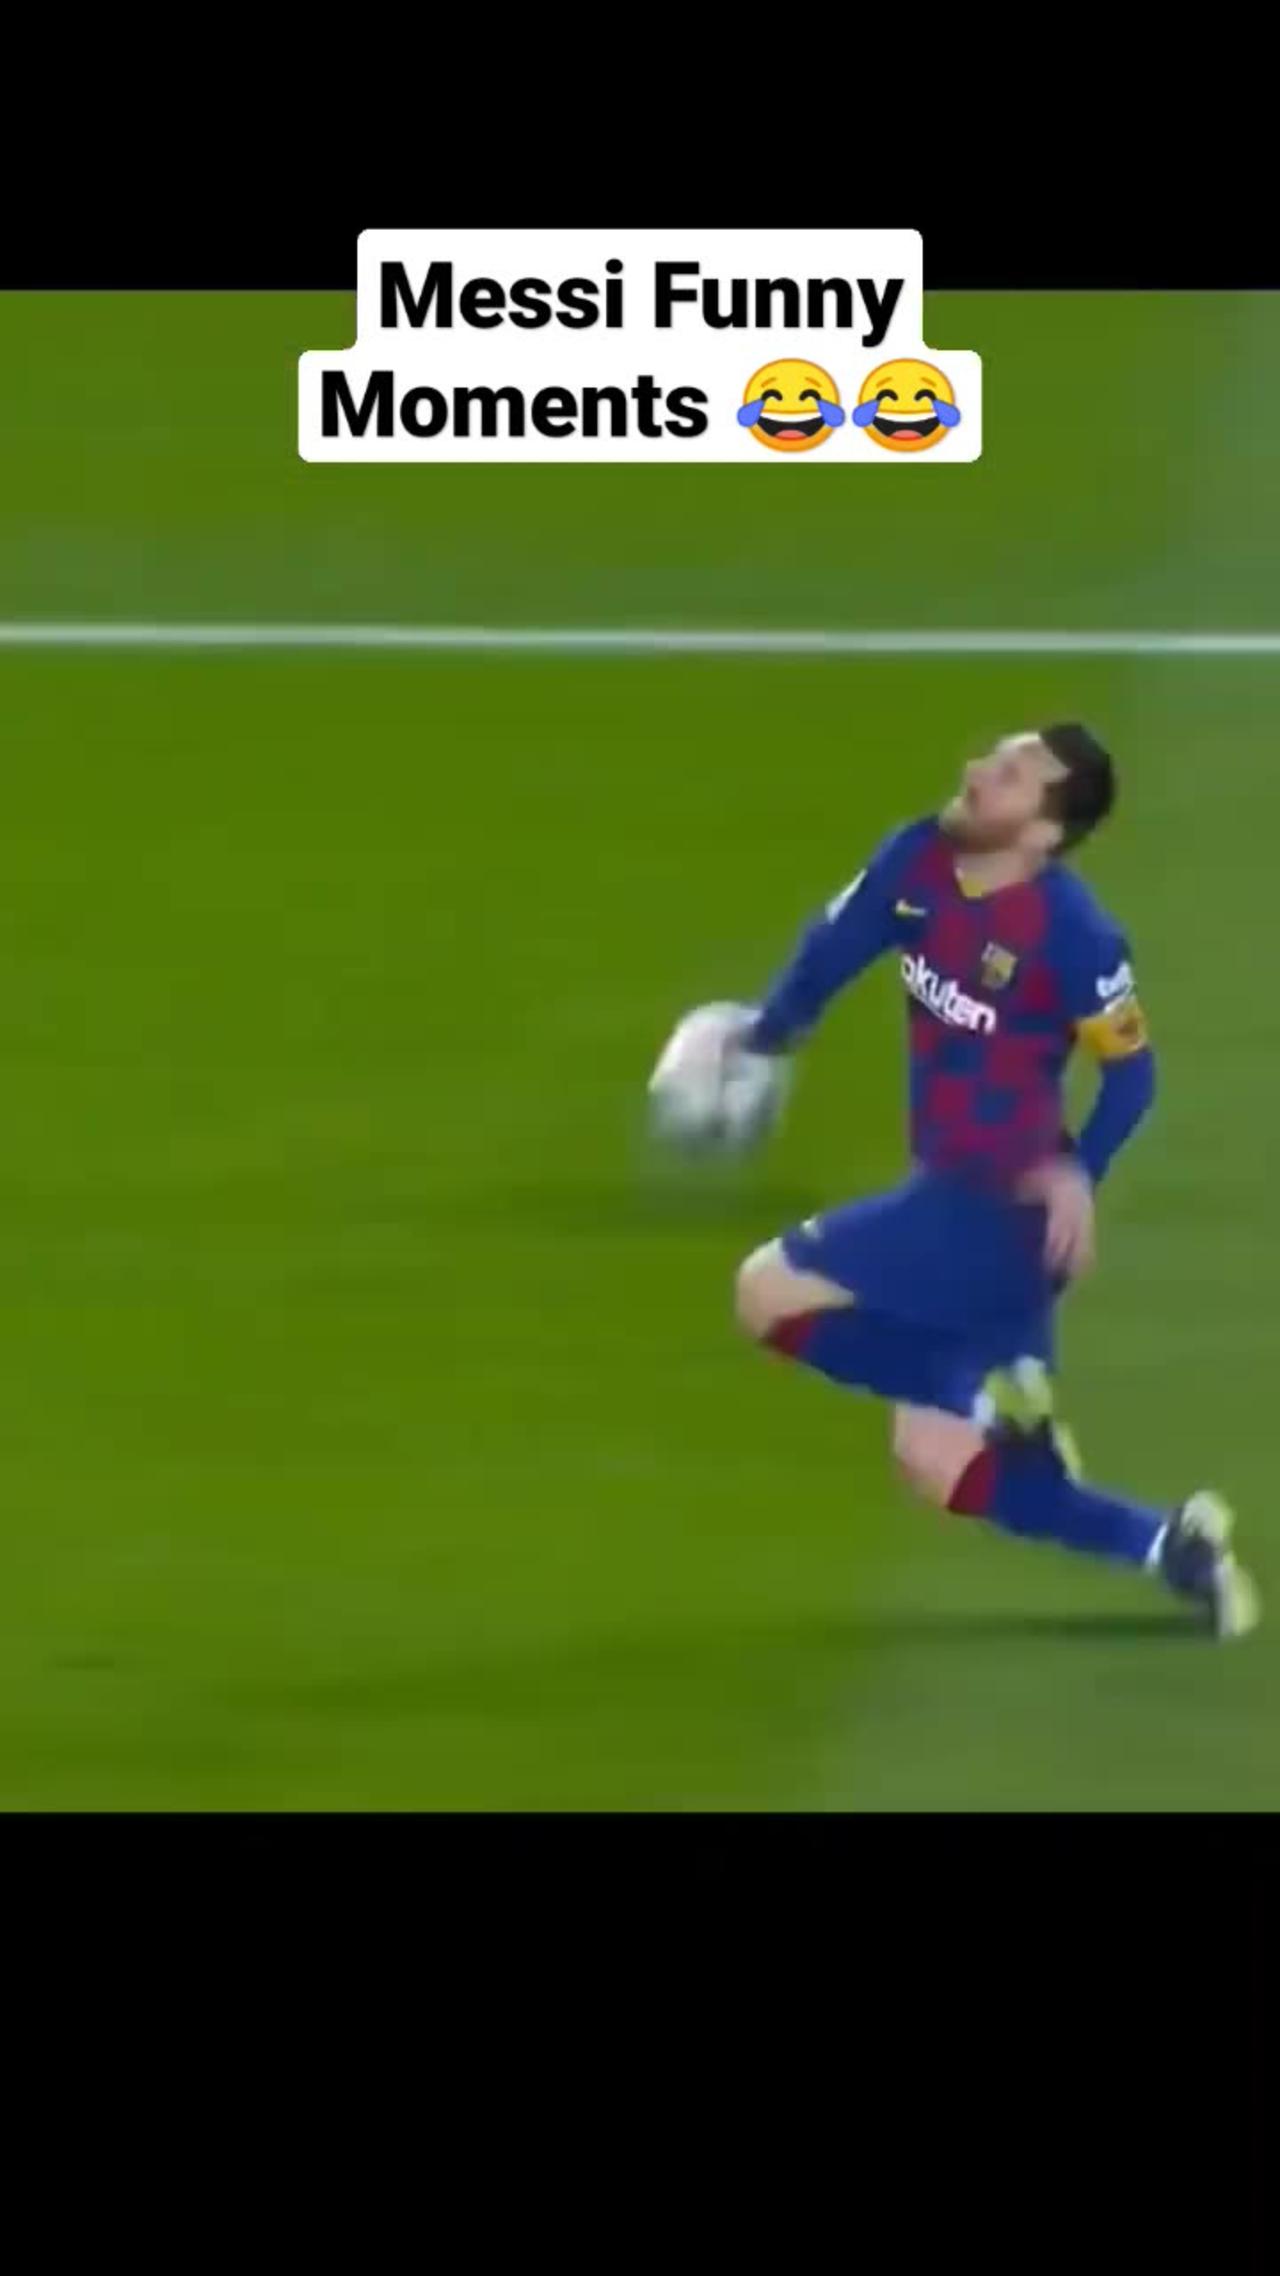 Lionel Messi Funniest moments - One News Page VIDEO